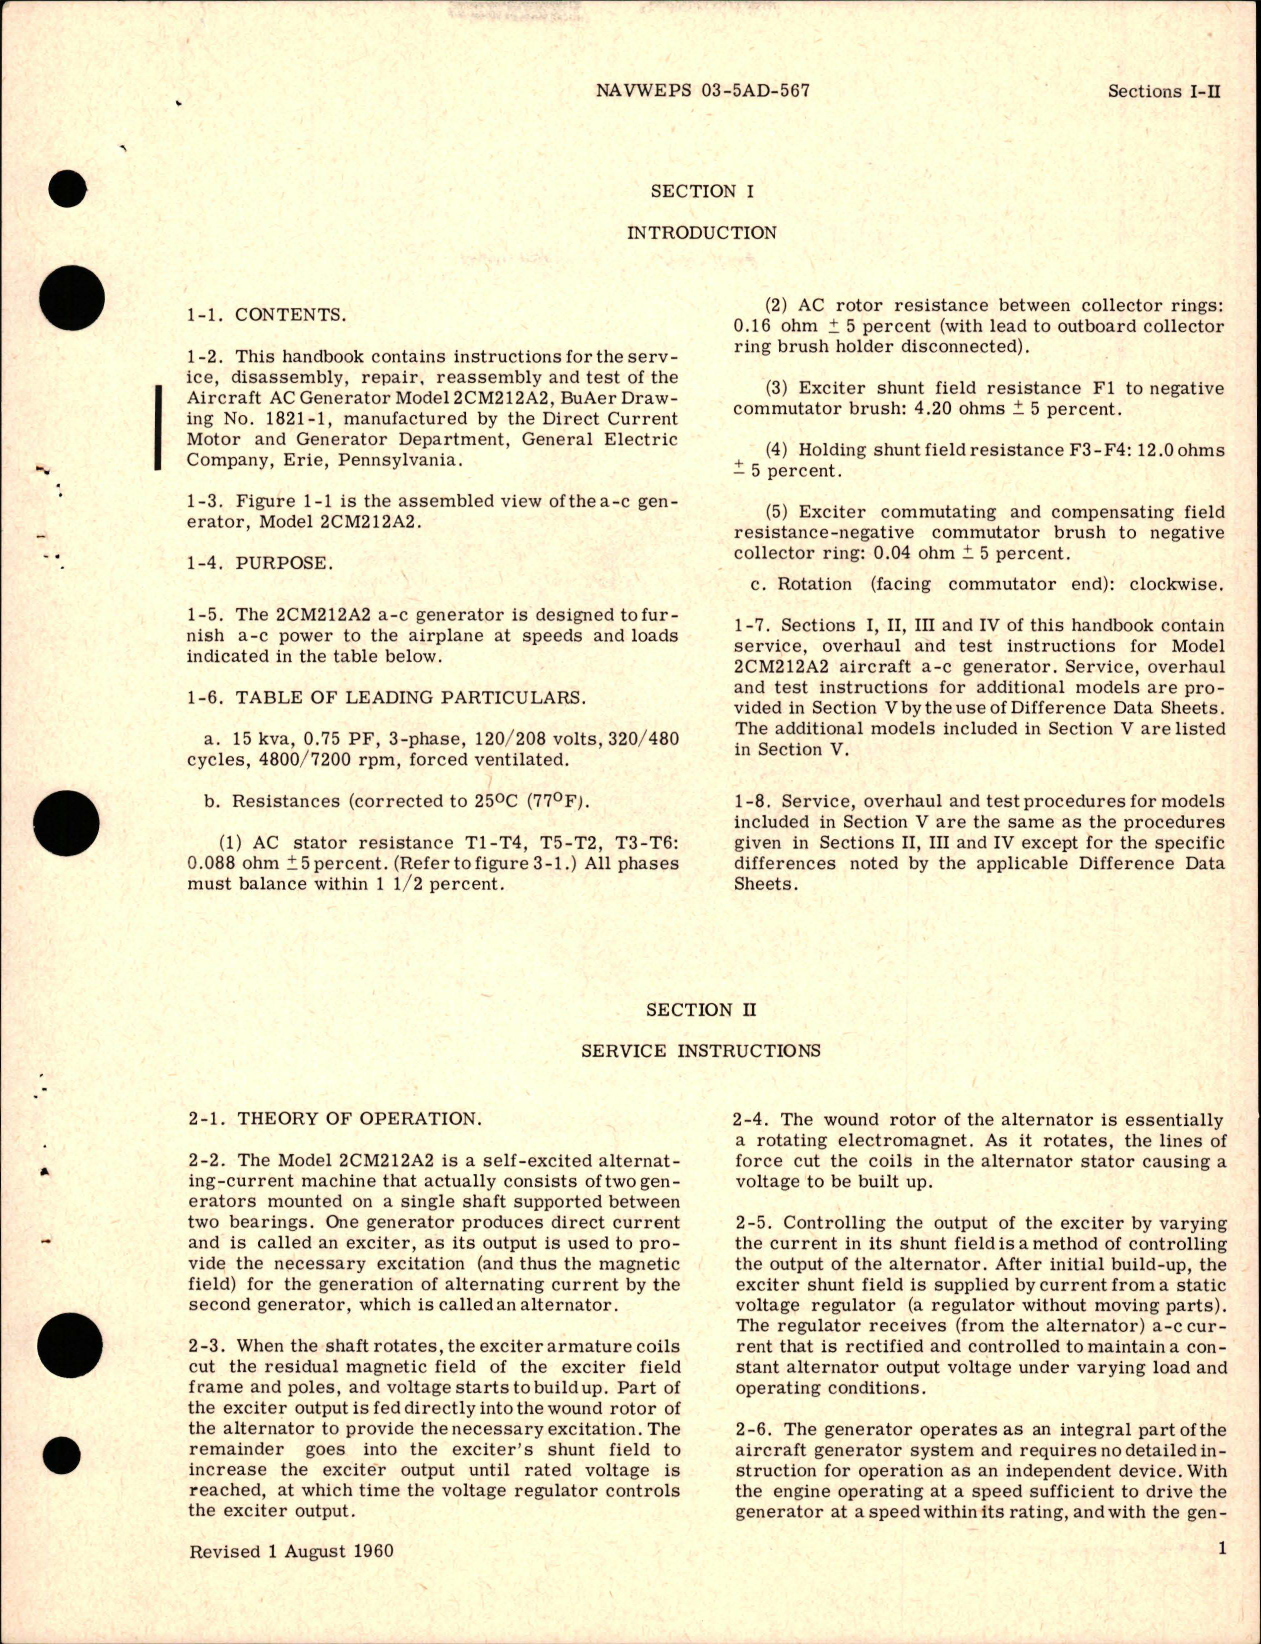 Sample page 5 from AirCorps Library document: Overhaul and Service Instructions for AC Generators 